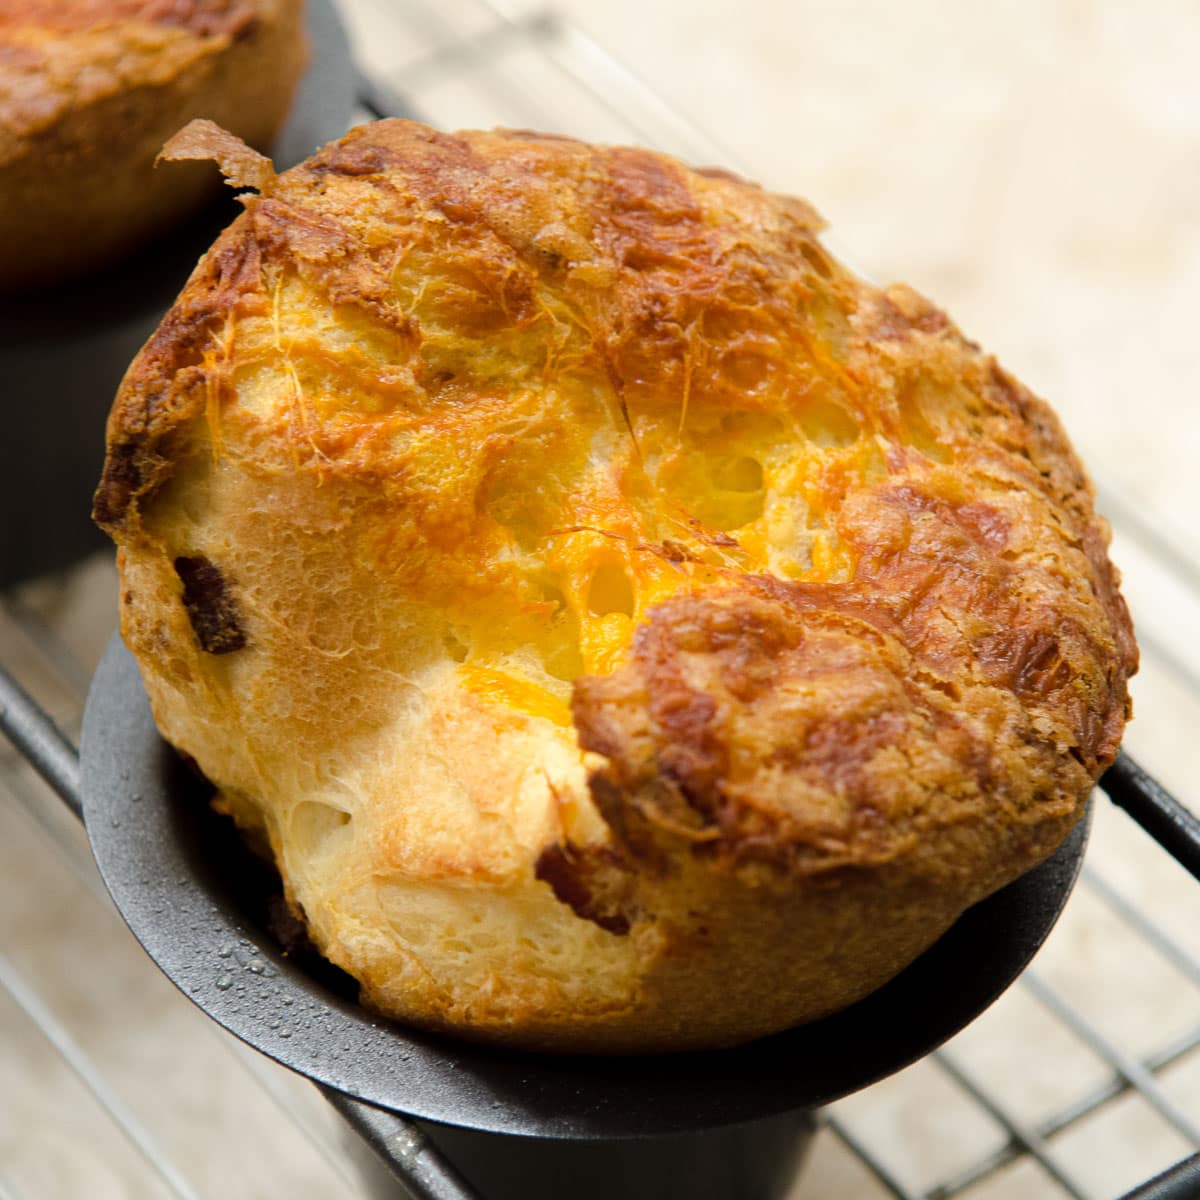 Bacon and Cheese Popover in it's mold cooling on a rack.